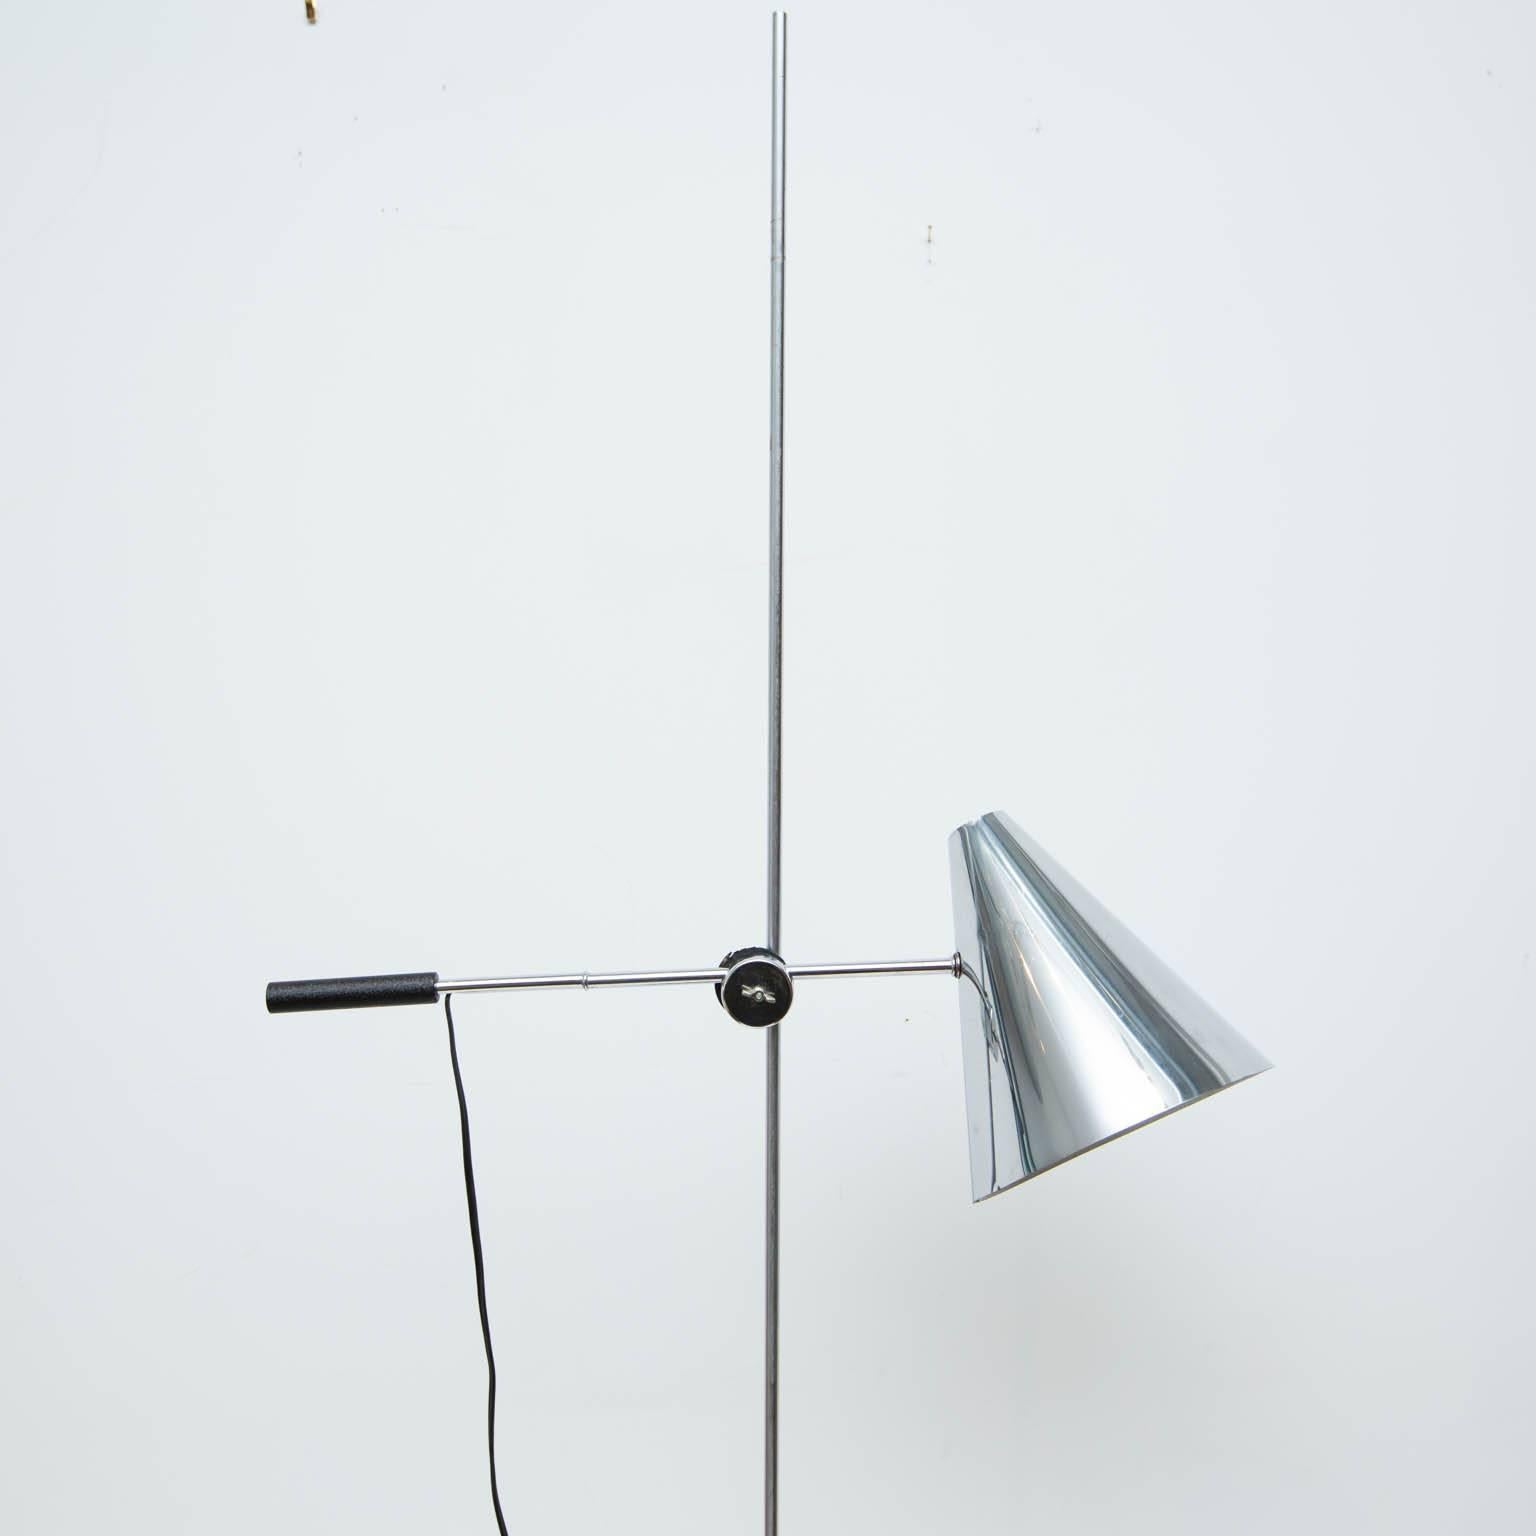 Articulating Chrome Floor Lamp by Robert Sonneman for Laurel In Excellent Condition For Sale In New London, CT